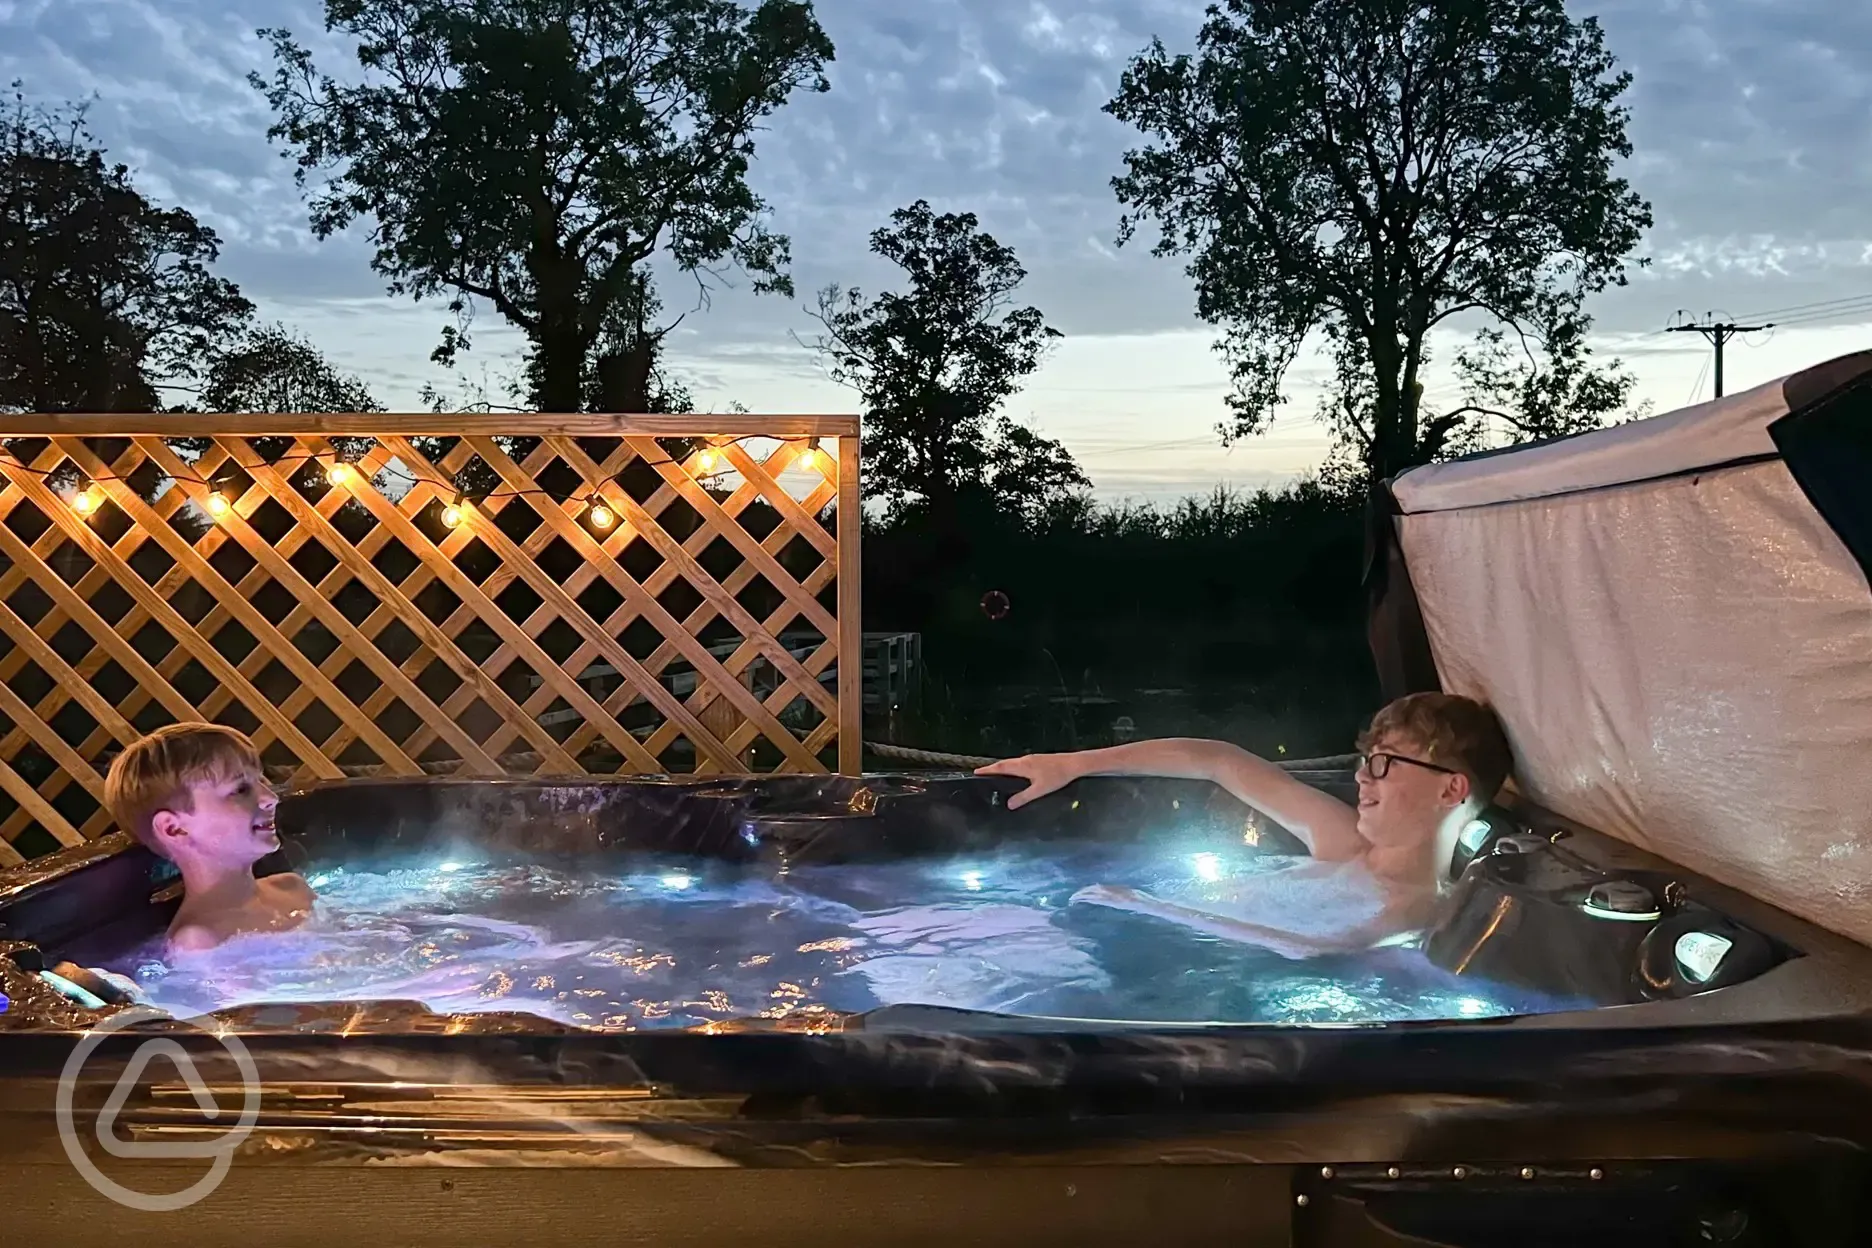 Private hot tubs at night